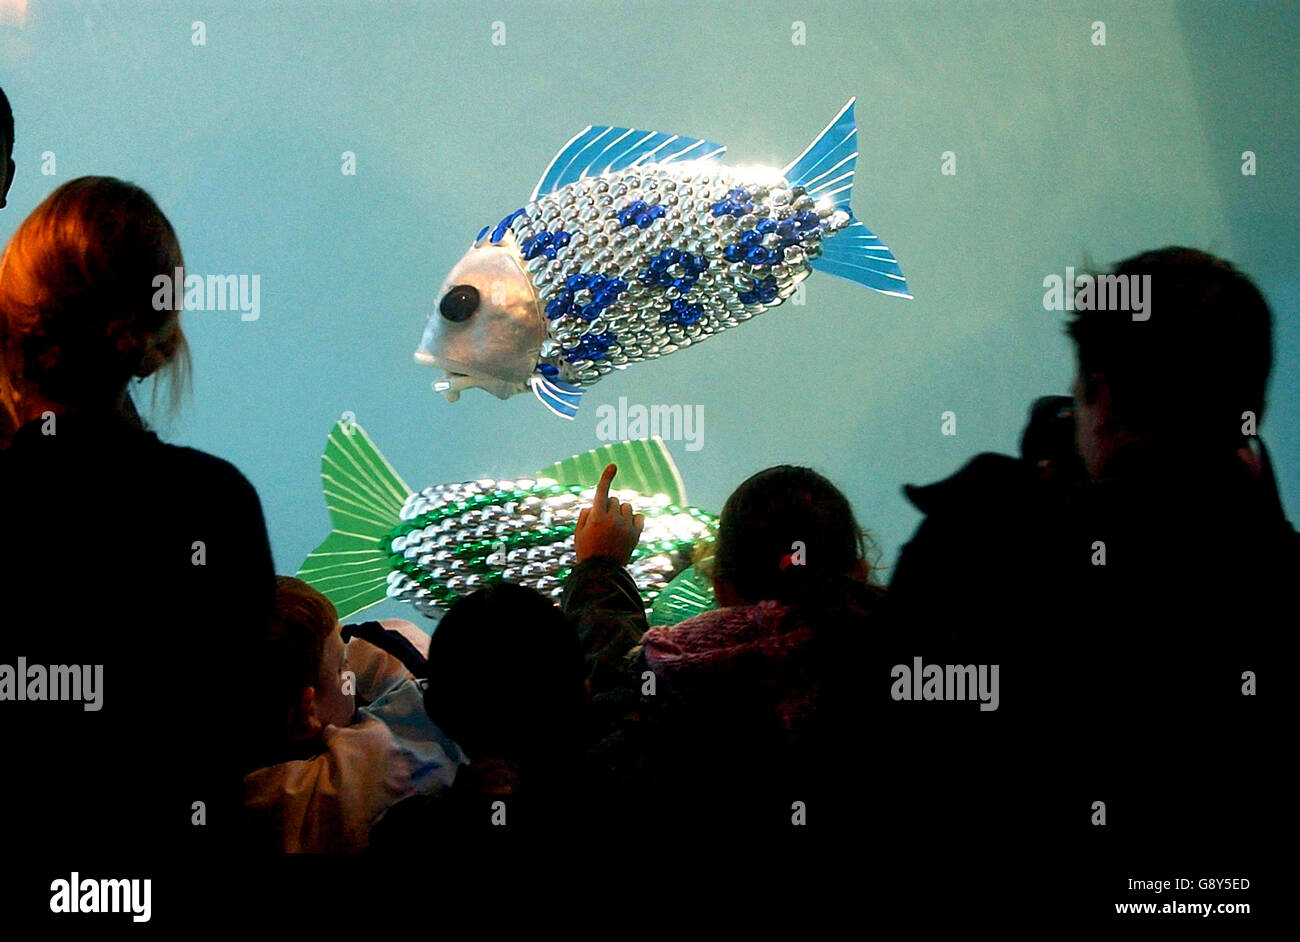 The world's first autonomously-controlled robotic fish was unveiled at the  London Aquarium. Visitors to the London Aquarium view robotic fish in a  specially adapted tank. The fish, designed by Professor Huosheng Hu,